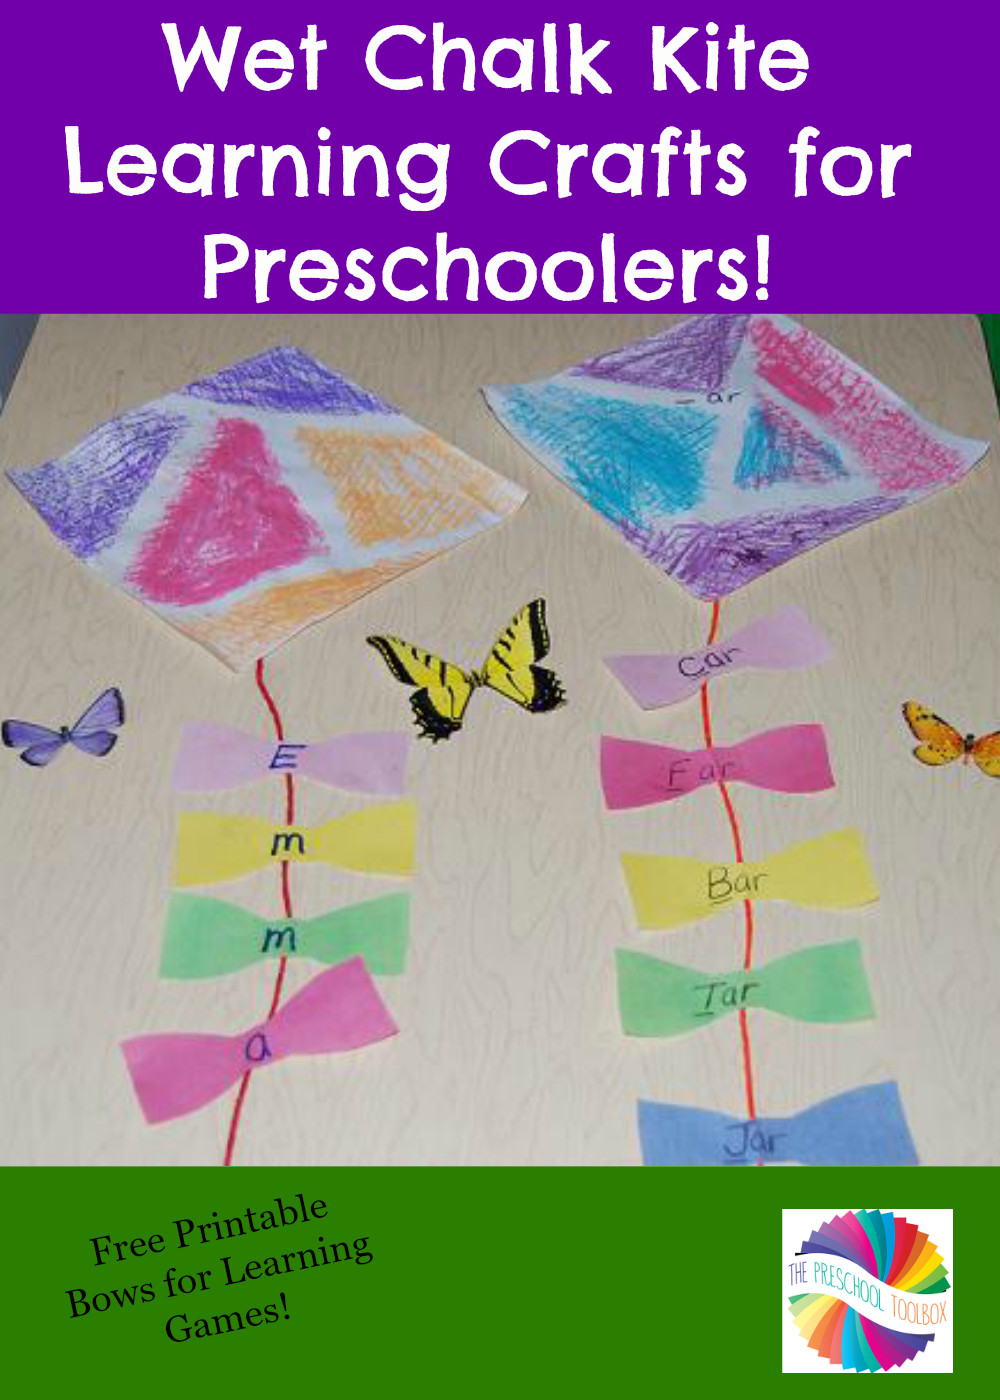 Craft Activities For Preschoolers
 Wet Chalk Kite Crafts and Learning Games for Young Kids